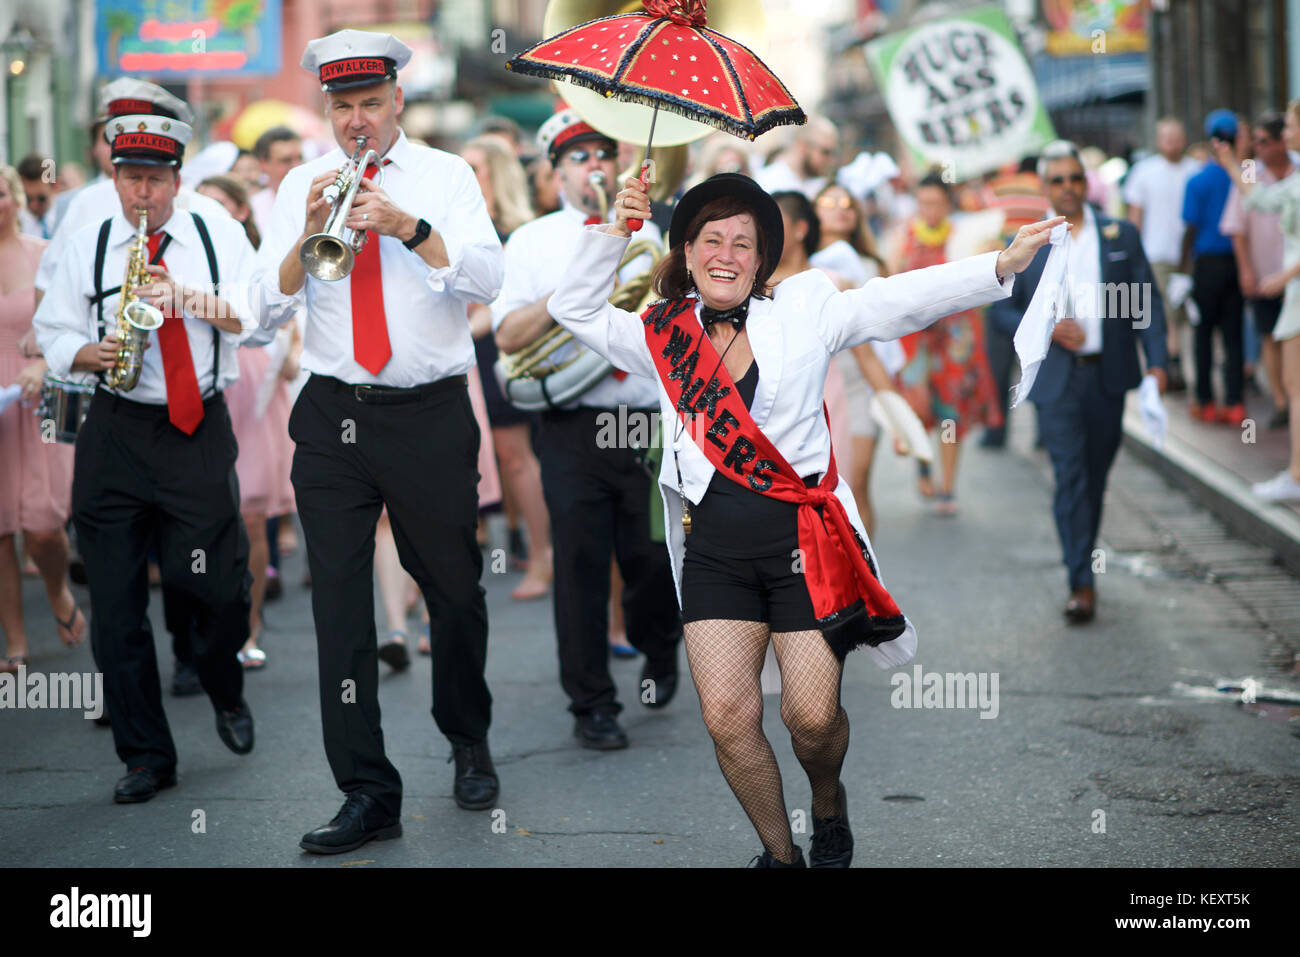 The Jaywalkers Brass Band leads a second line parade in the French Quarter of New Orleans, Louisiana Stock Photo